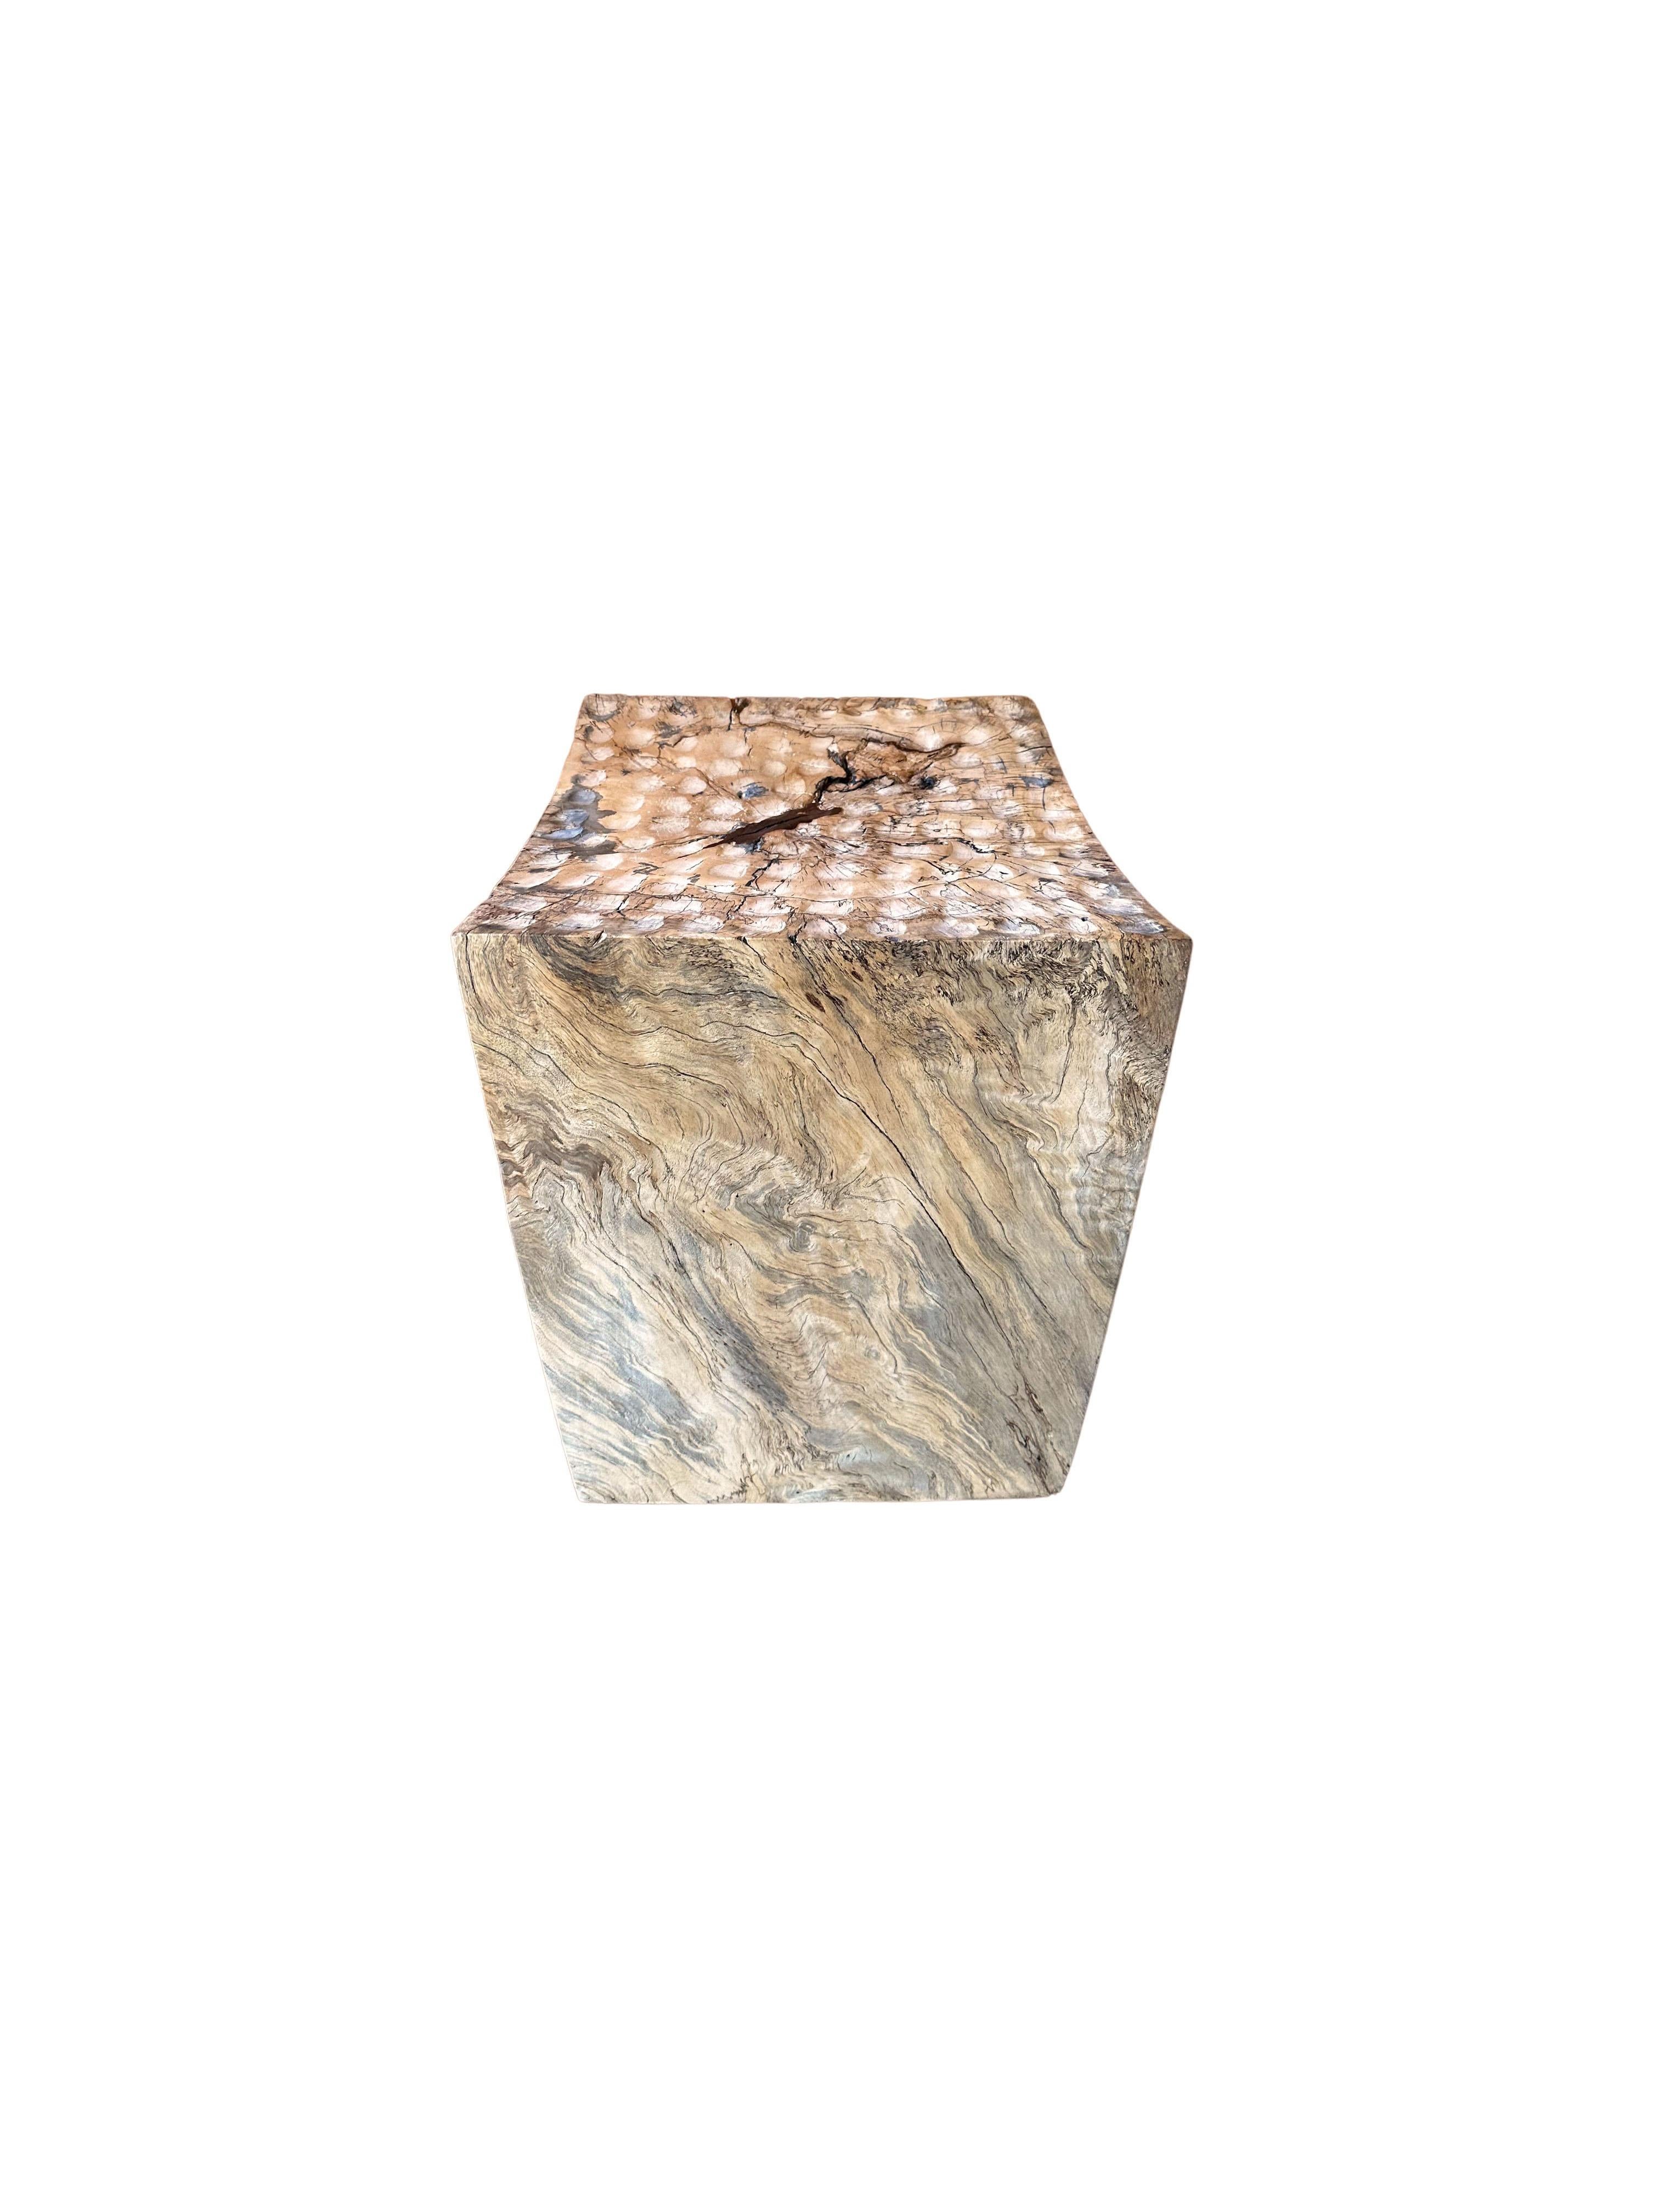 Contemporary Sculptural Stool Carved from Solid Tamarind Wood Modern Organic For Sale